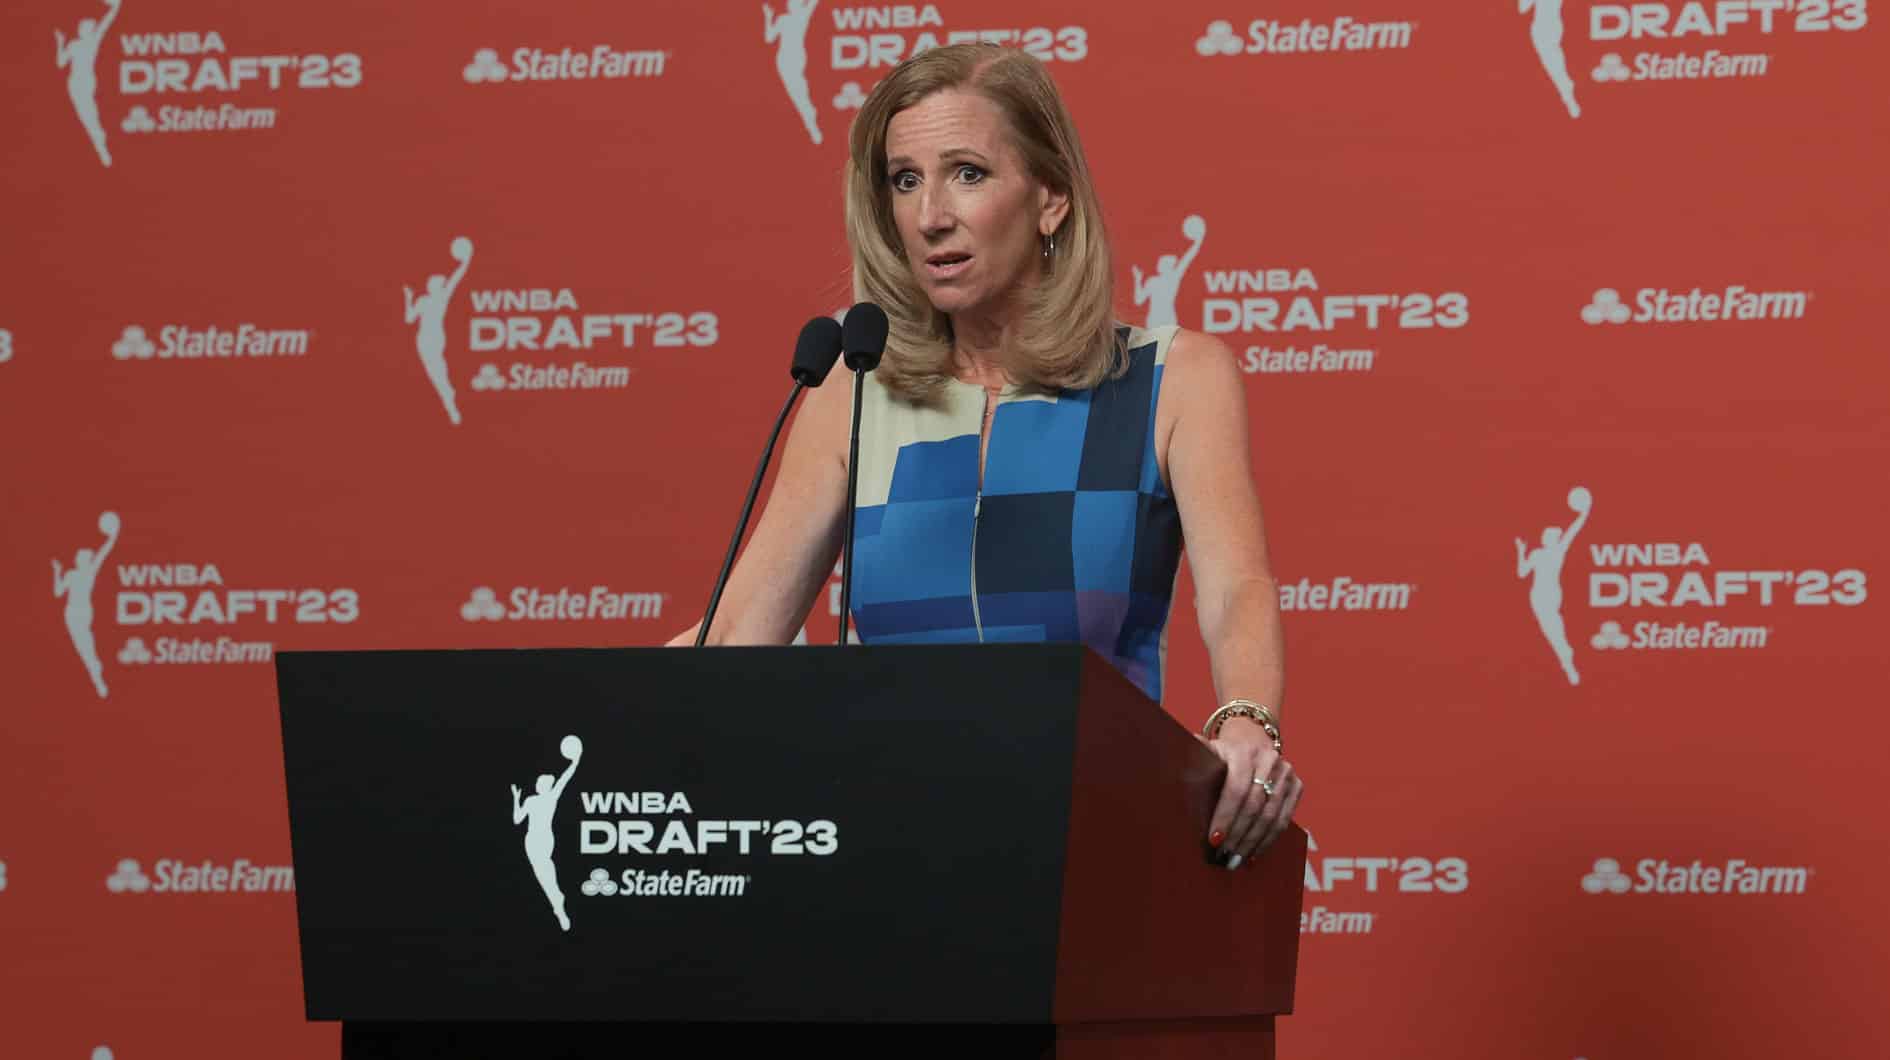 Apr 10, 2023; New York, NY, USA; WNBA Commissioner Cathy Engelbert speaks to the media before the WNBA Draft 2023 at Spring Studio. Mandatory Credit: Vincent Carchietta-USA TODAY Sports